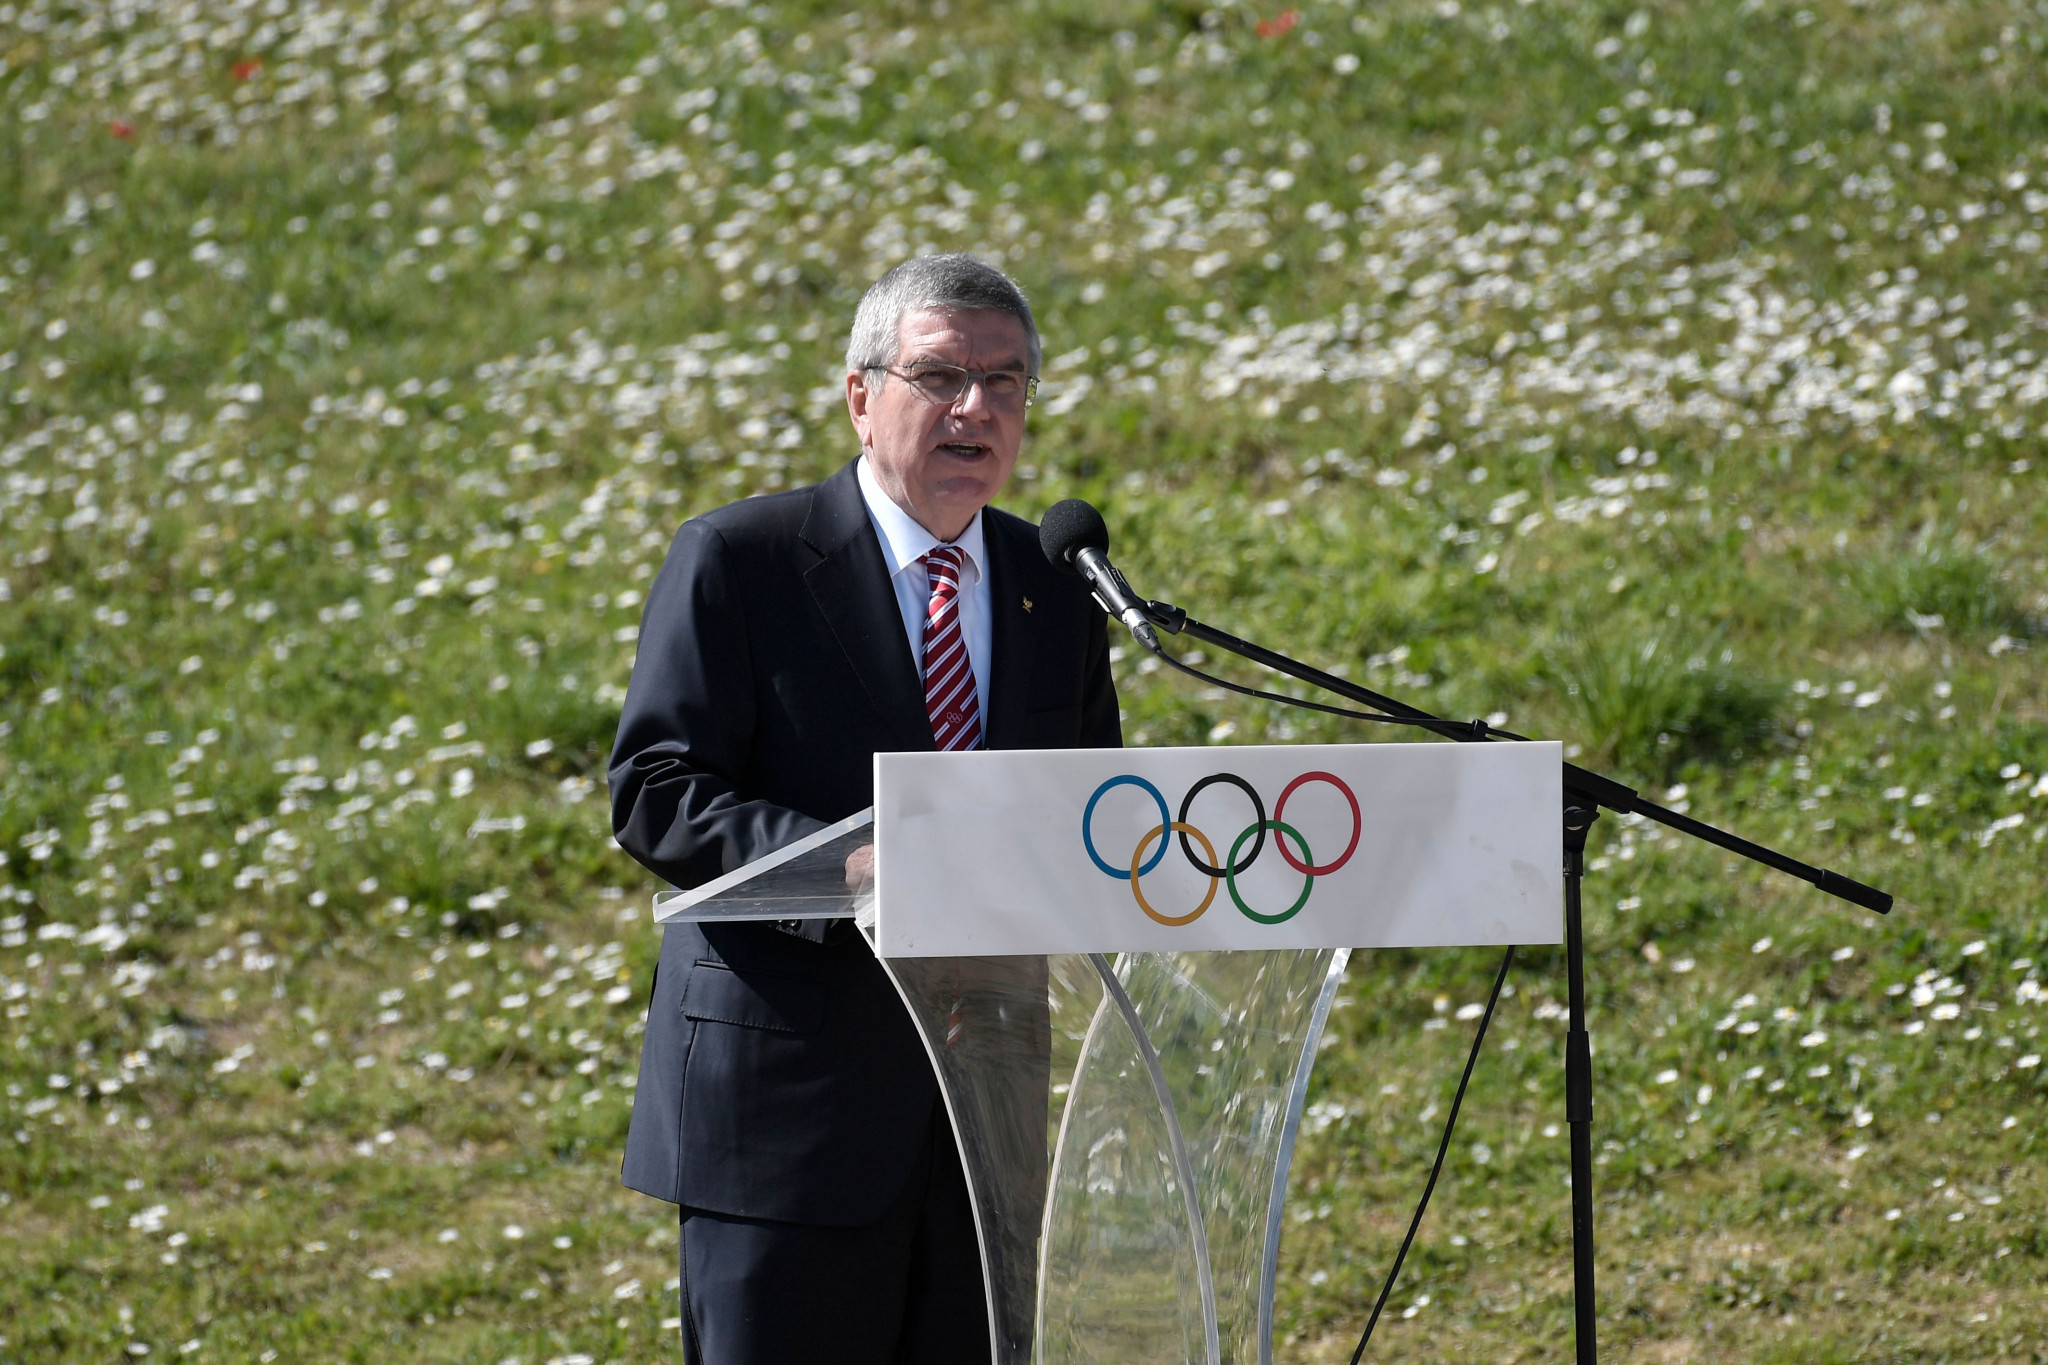 There are now doubts on when Thomas Bach could stand for re-election as IOC President ©Getty Images